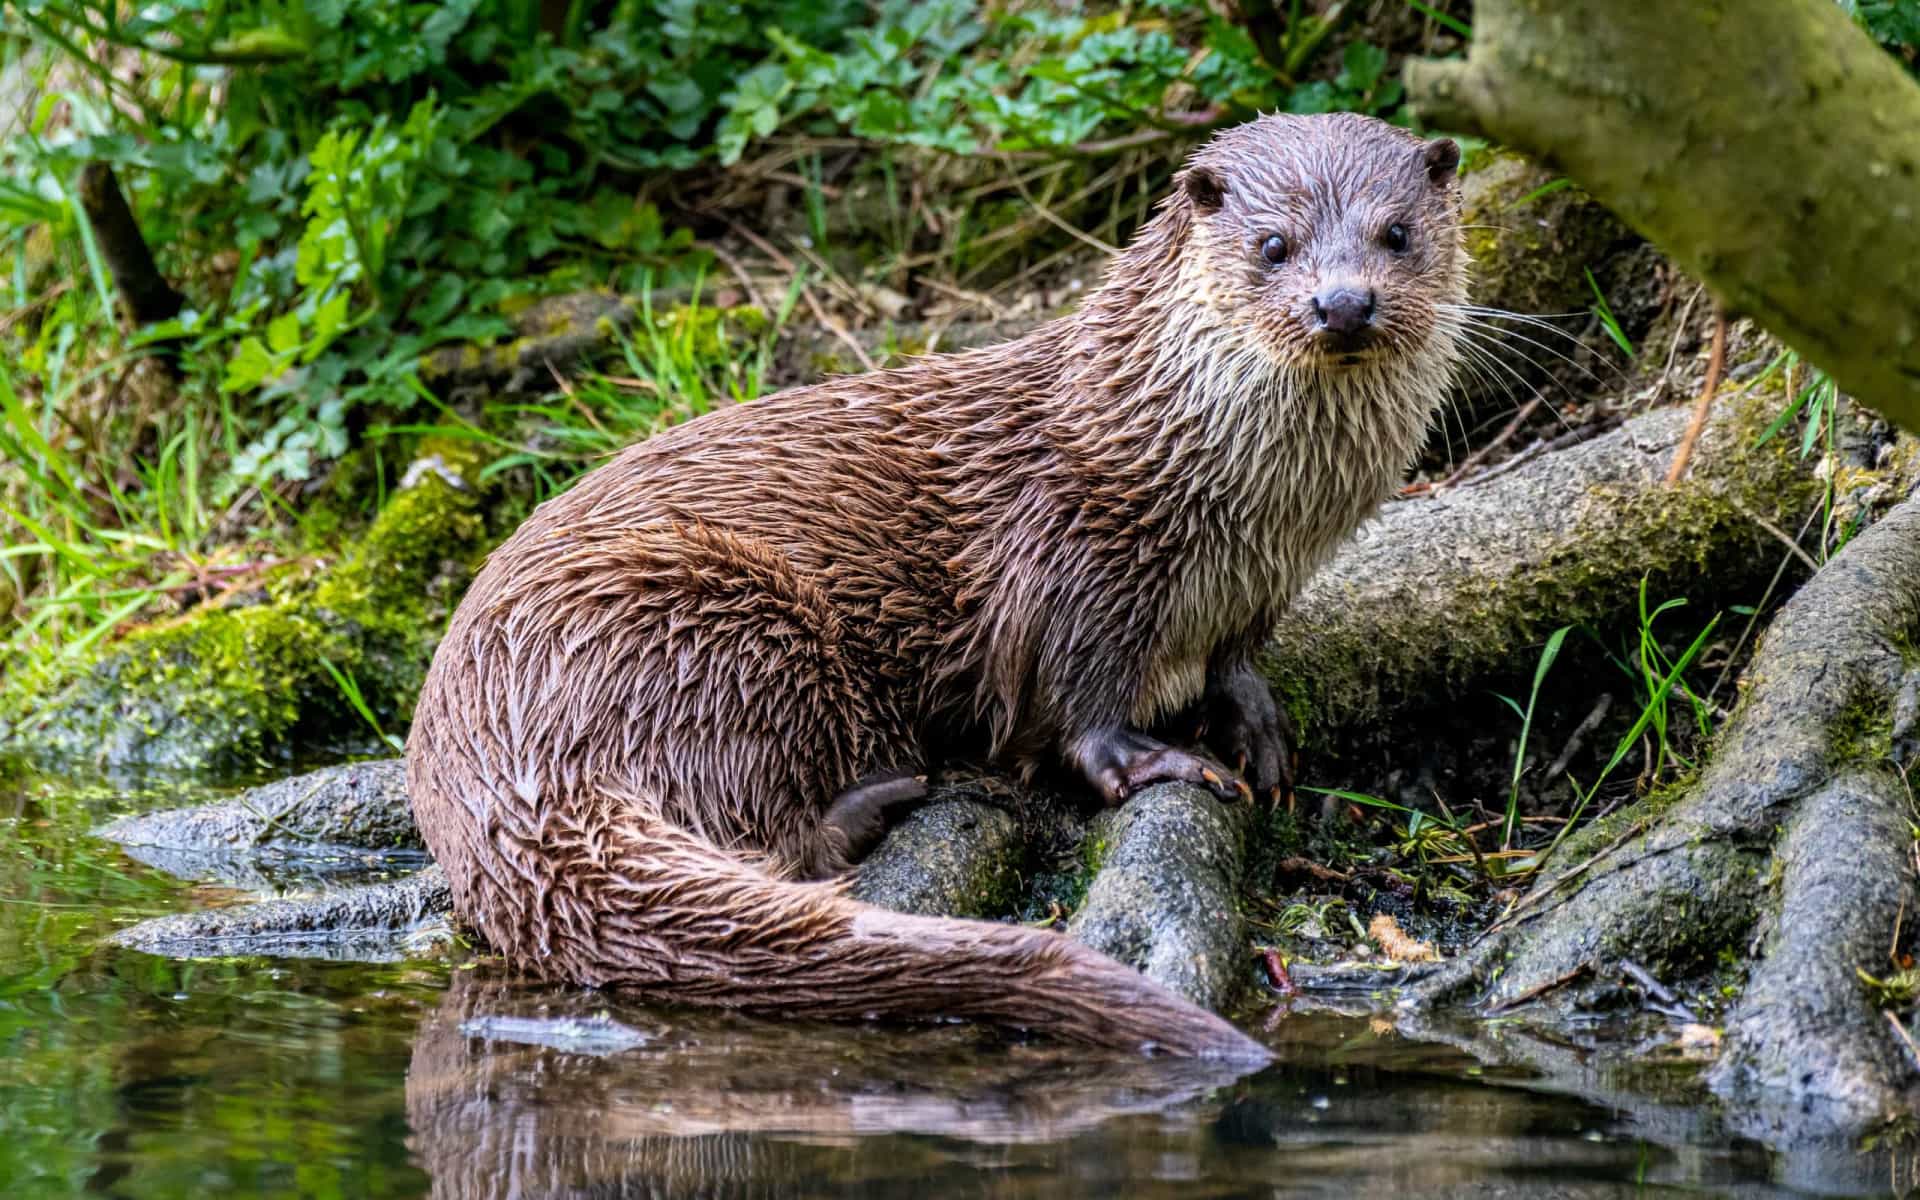 <p>Make sure your trip to Stamford involves investigating the delightful Stamford Museum & Nature Center, where the resident river otters are guaranteed to put a smile on your face. The Stamford Center for the Arts should also be checked out for its entertainment program, which often brings A-list performers to town.</p><p><a href="https://www.msn.com/en-us/community/channel/vid-7xx8mnucu55yw63we9va2gwr7uihbxwc68fxqp25x6tg4ftibpra?cvid=94631541bc0f4f89bfd59158d696ad7e">Follow us and access great exclusive content everyday</a></p>